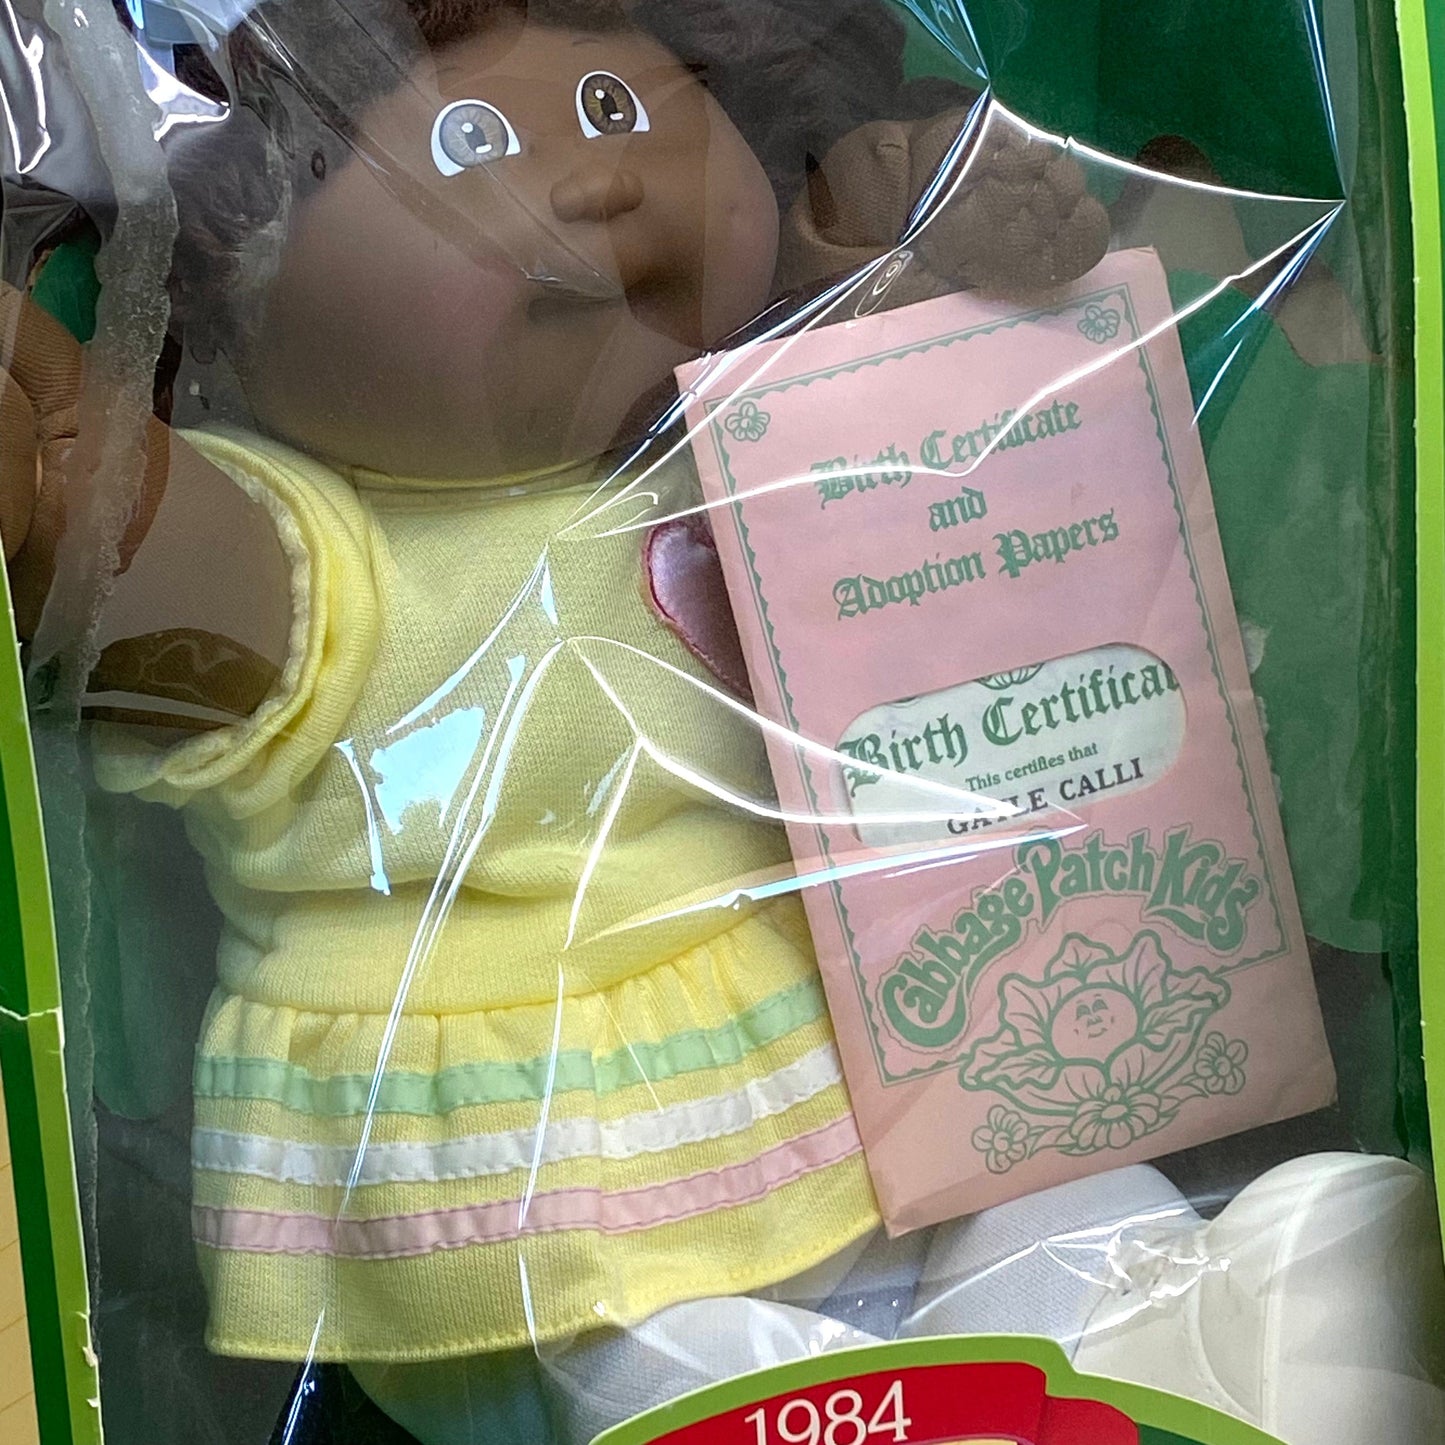 Cabbage Patch Kids | Girl Doll "Gayle Calli" 1984 | Vintage in Original Box